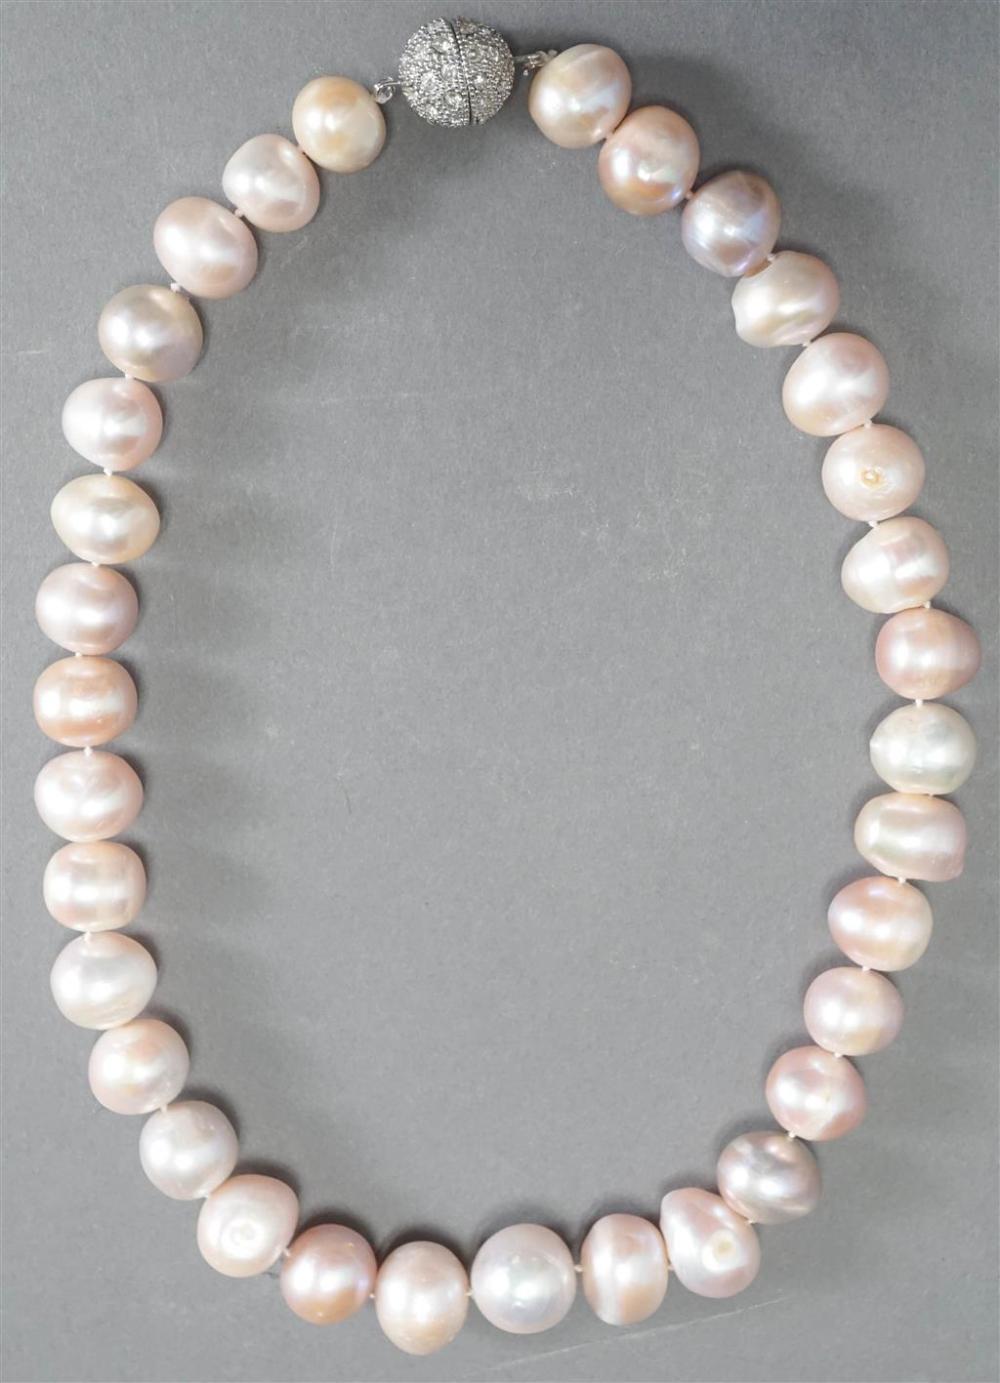 MULTICOLOR FRESHWATER PEARL NECKLACE 32997f